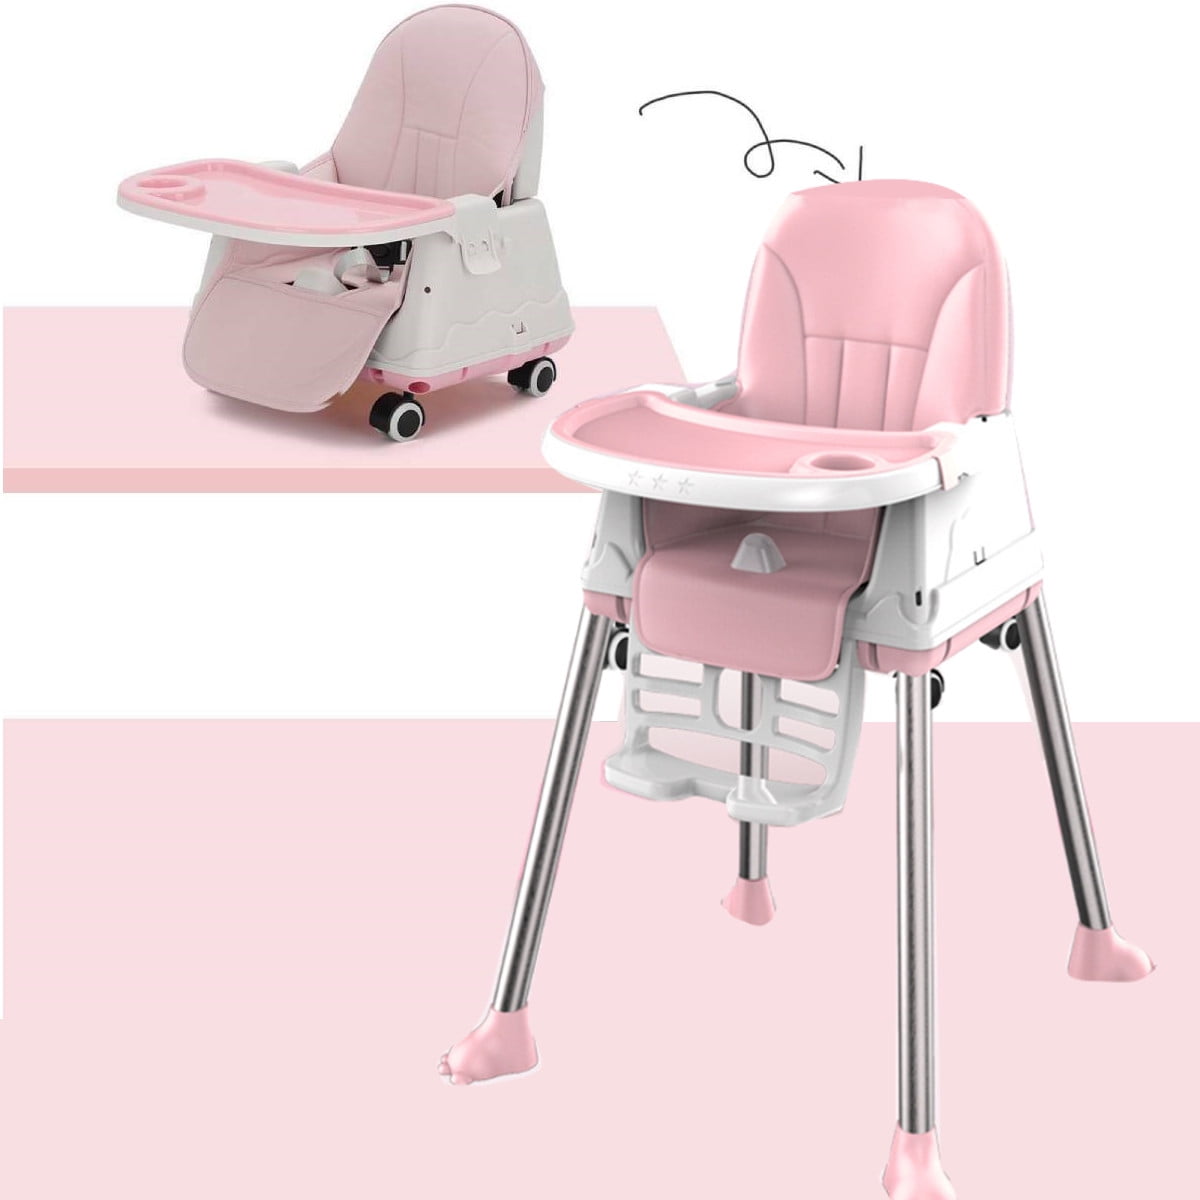 Red Adjustable Removable Baby Dining Chair Booster Cushion Kids Highchair Seat Pad Leyee Children Baby Highchair Pad Seat